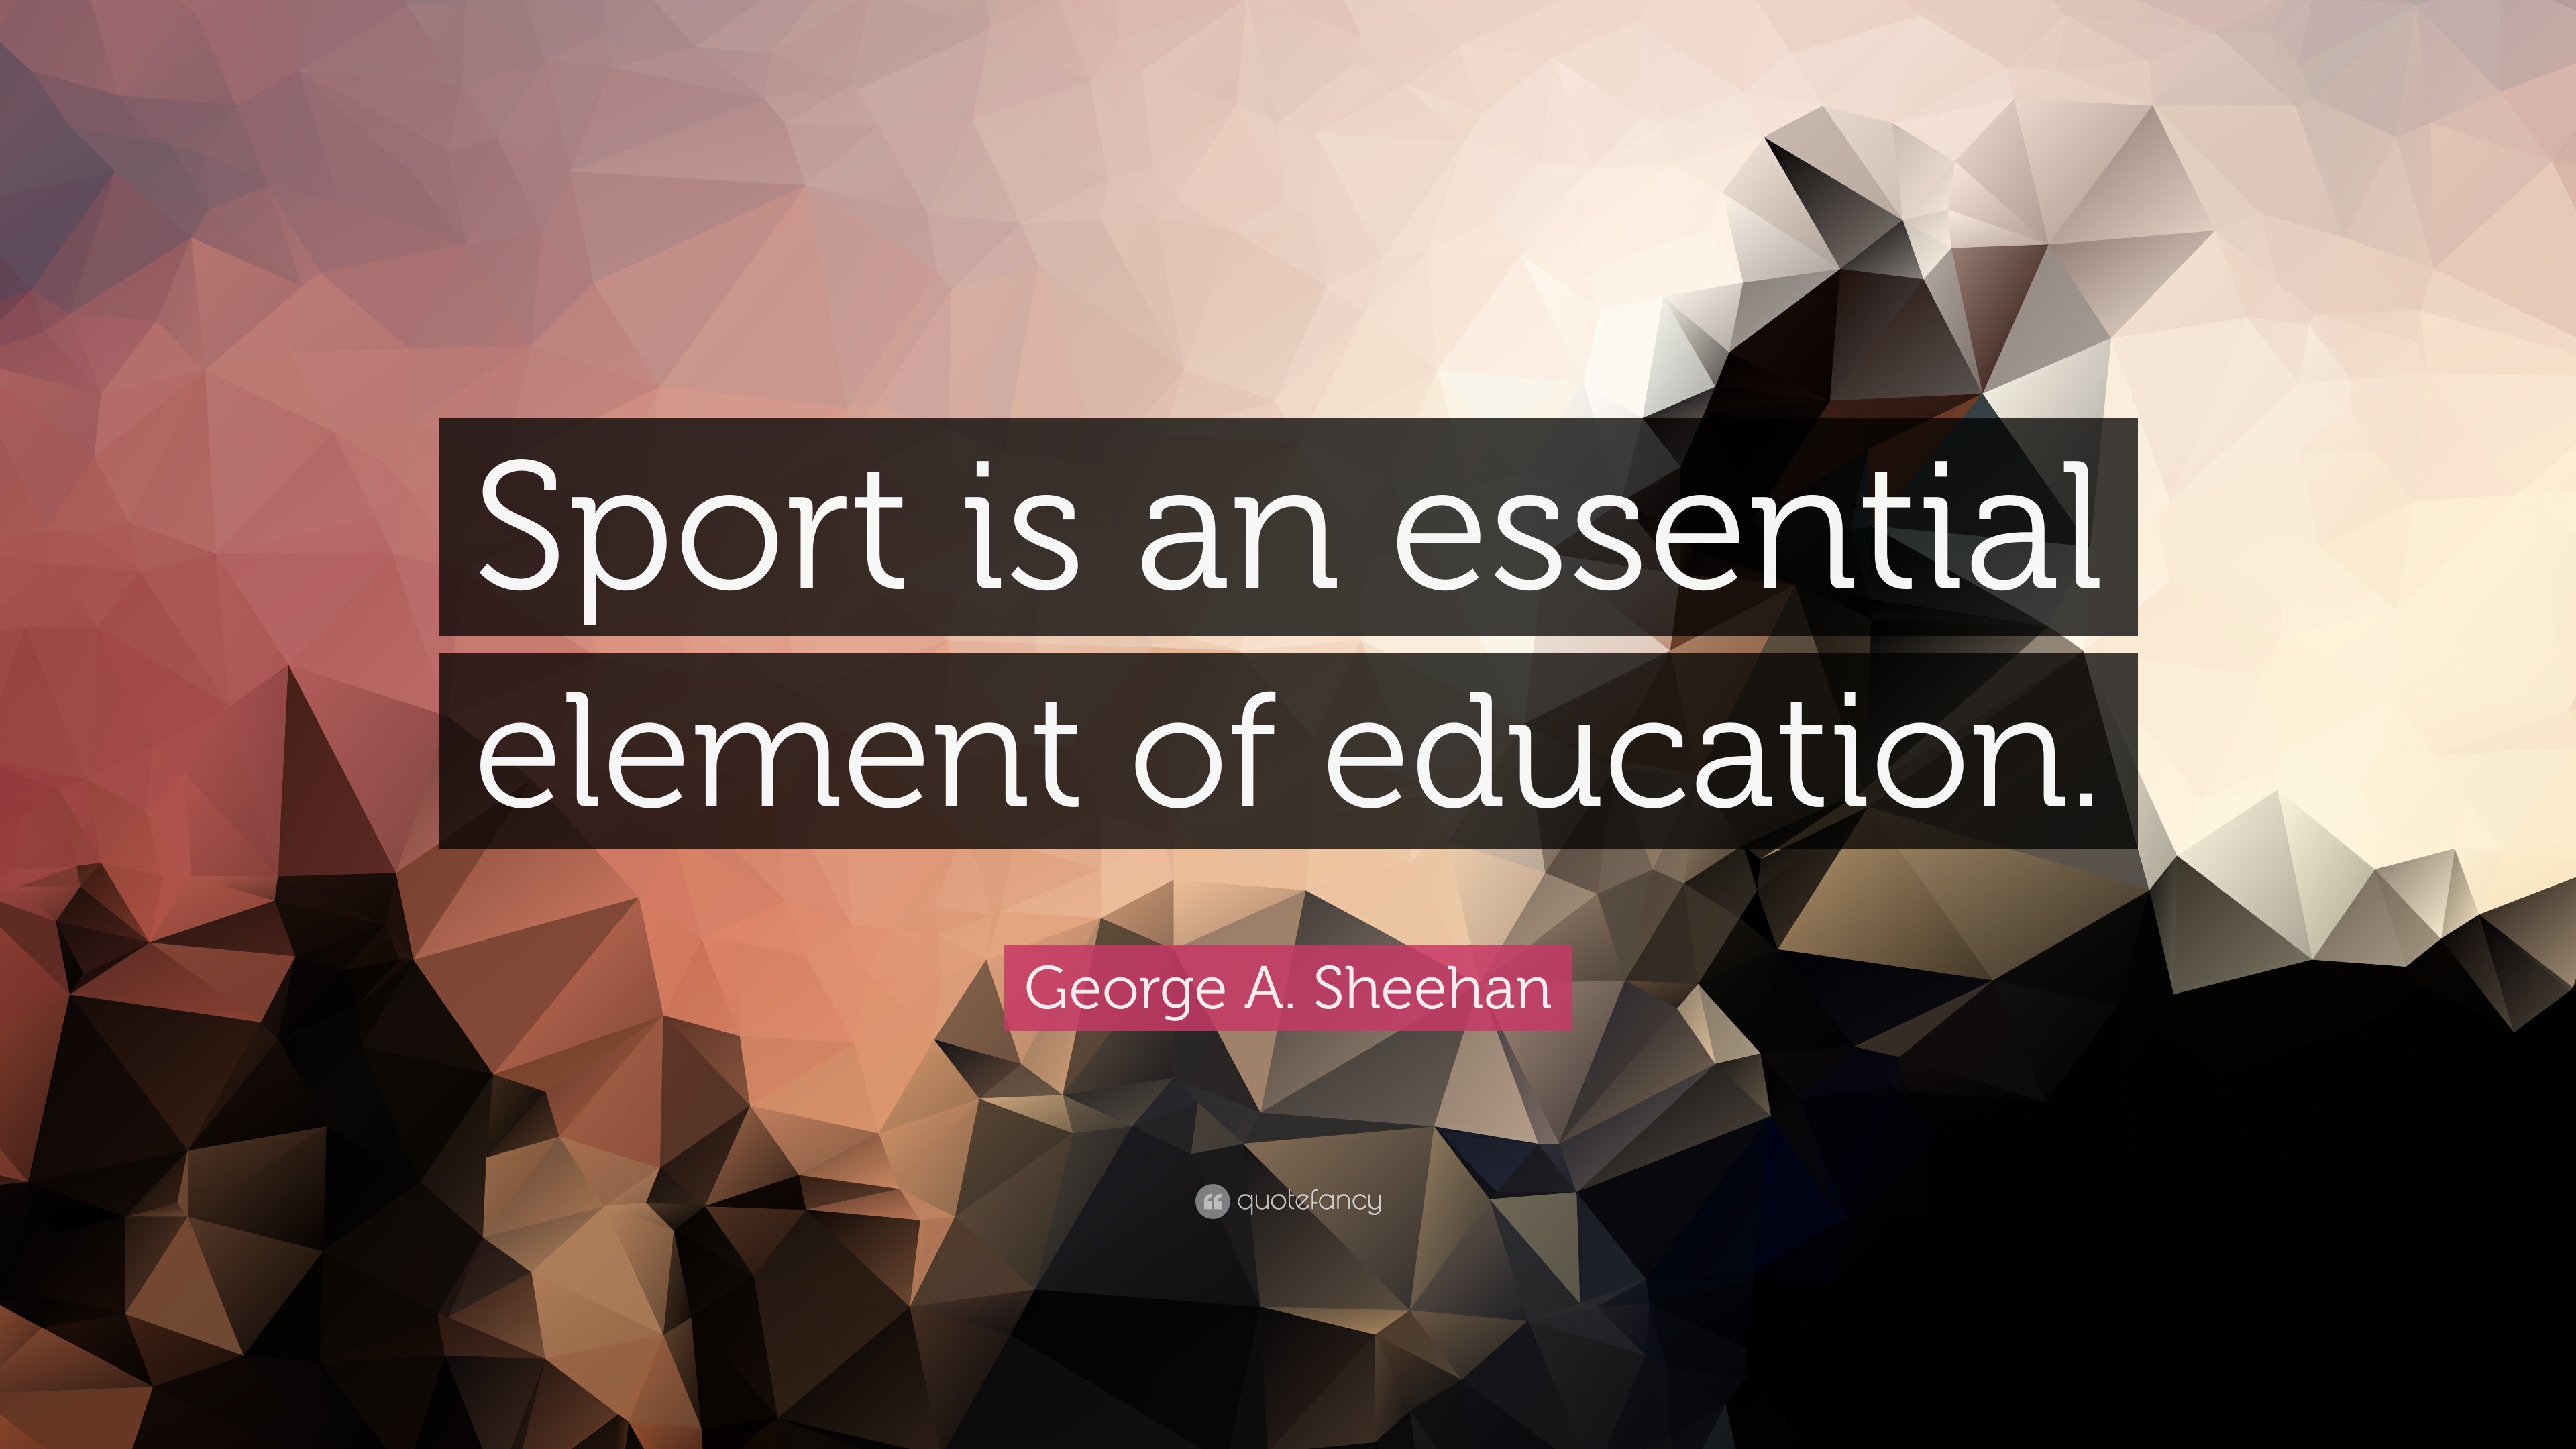 https://quotefancy.com/media/wallpaper/3840x2160/4939773-George-A-Sheehan-Quote-Sport-is-an-essential-element-of-education.jpg